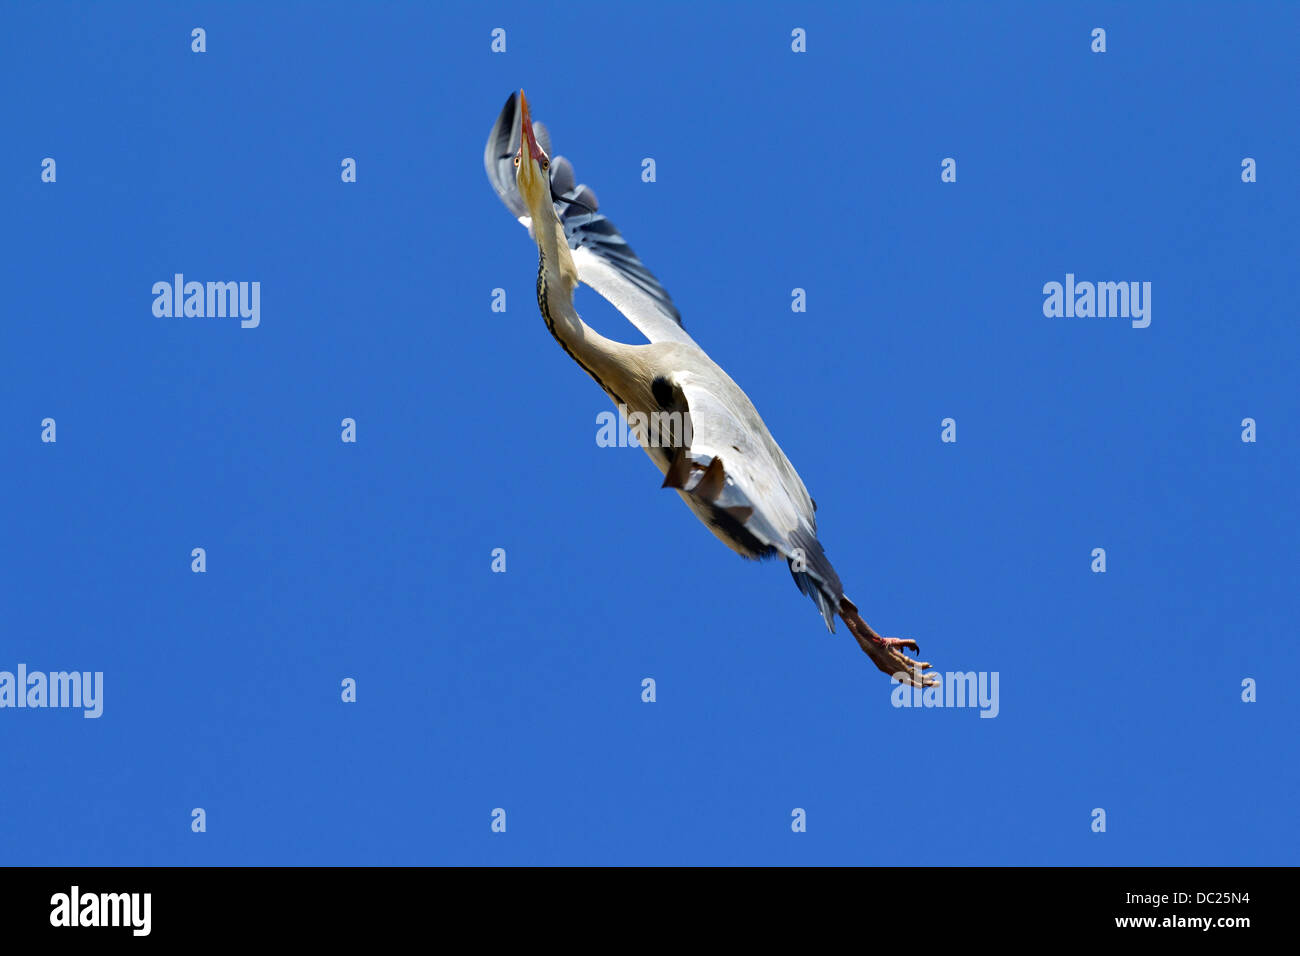 Grey heron / Gray heron (Ardea cinerea) in flight soaring on rising air due to thermal against blue sky Stock Photo